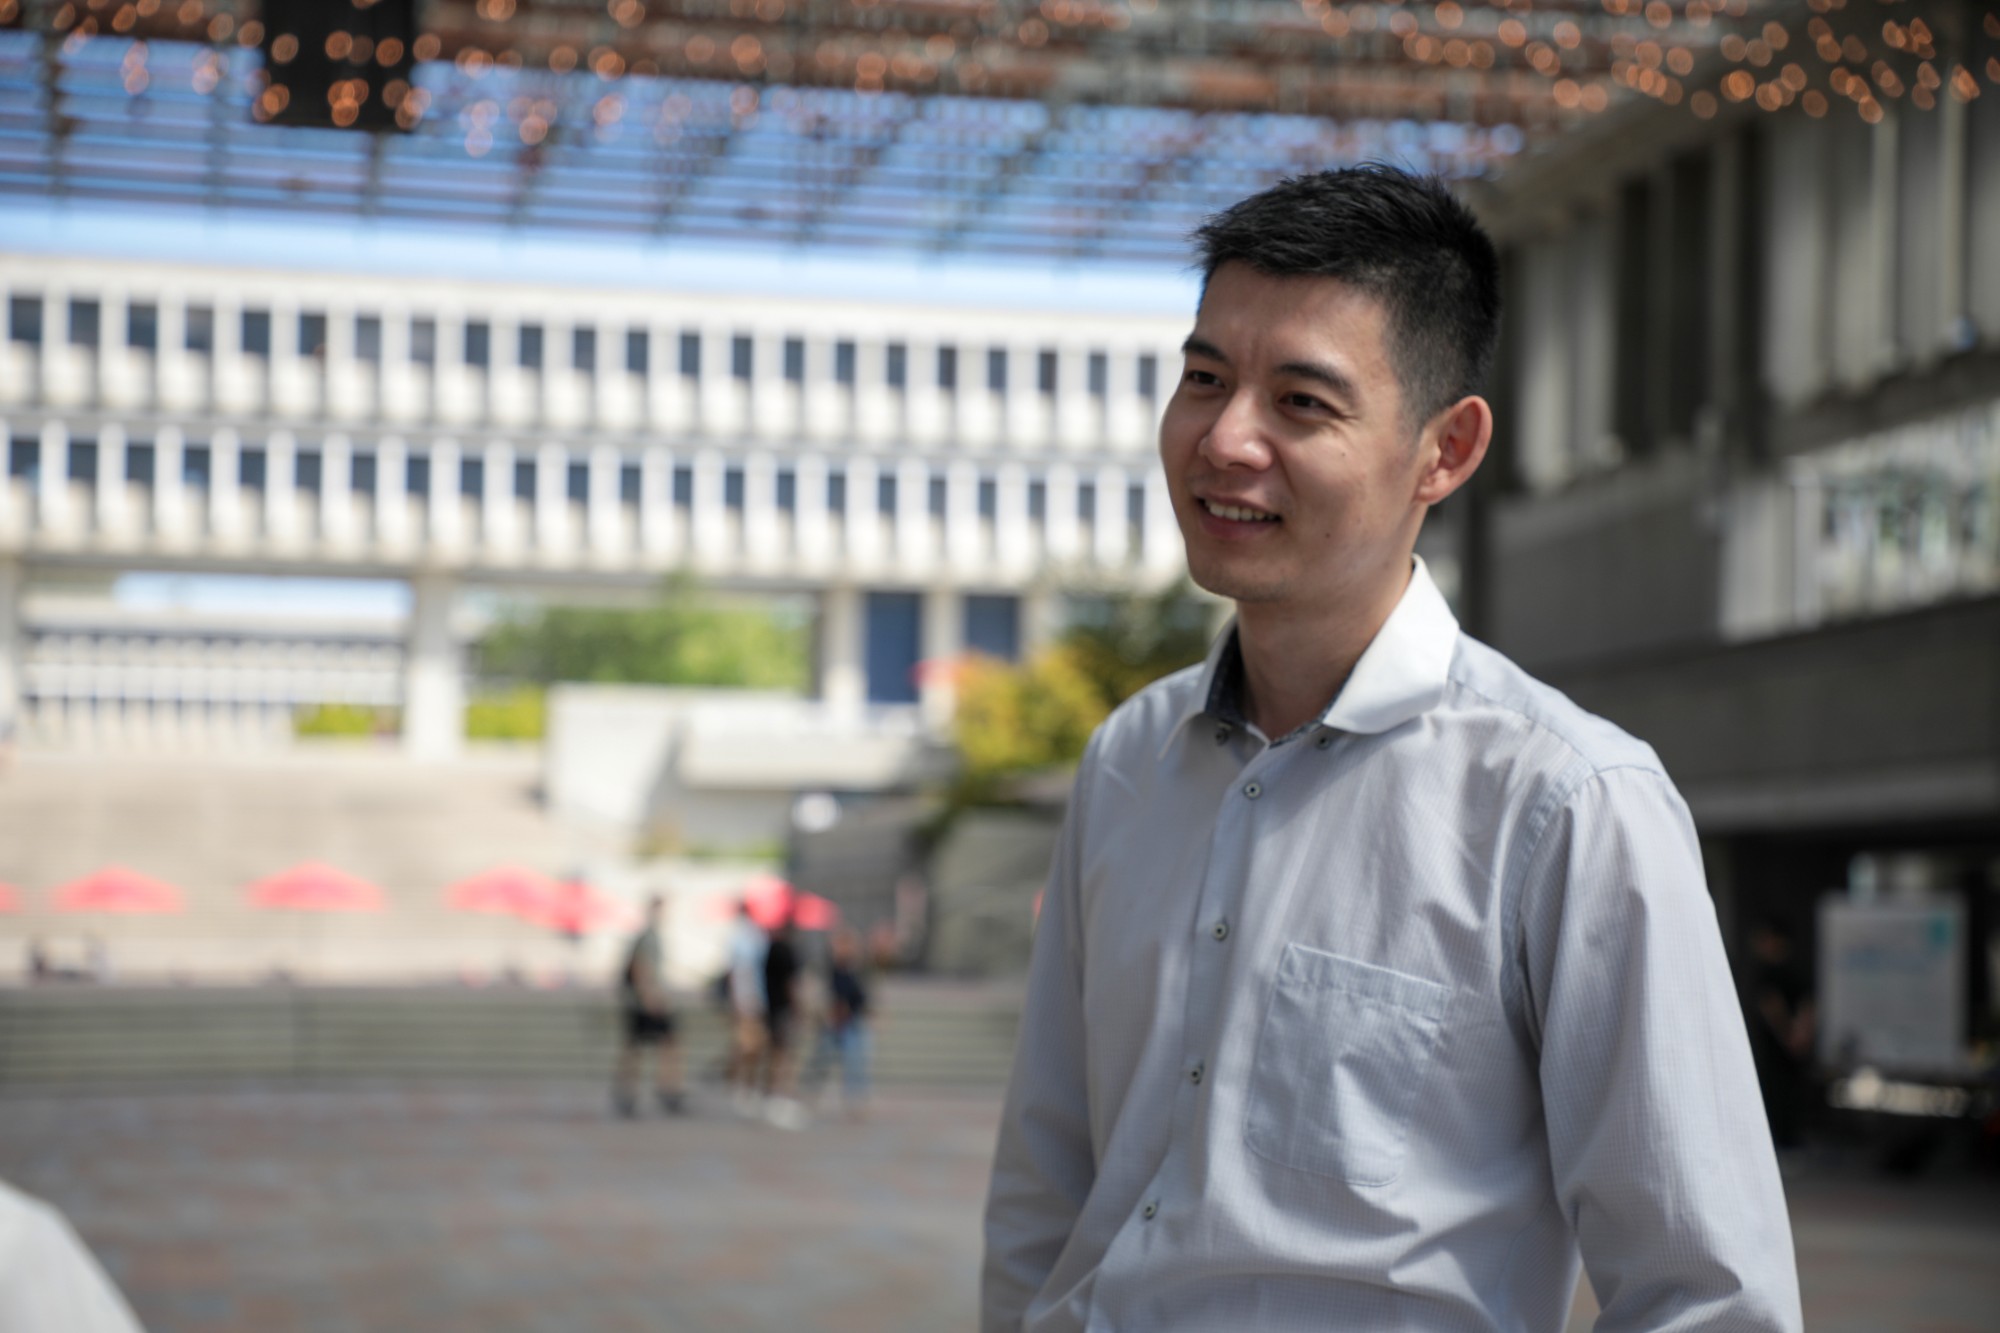 Faculty of Education and You: Liang Cao